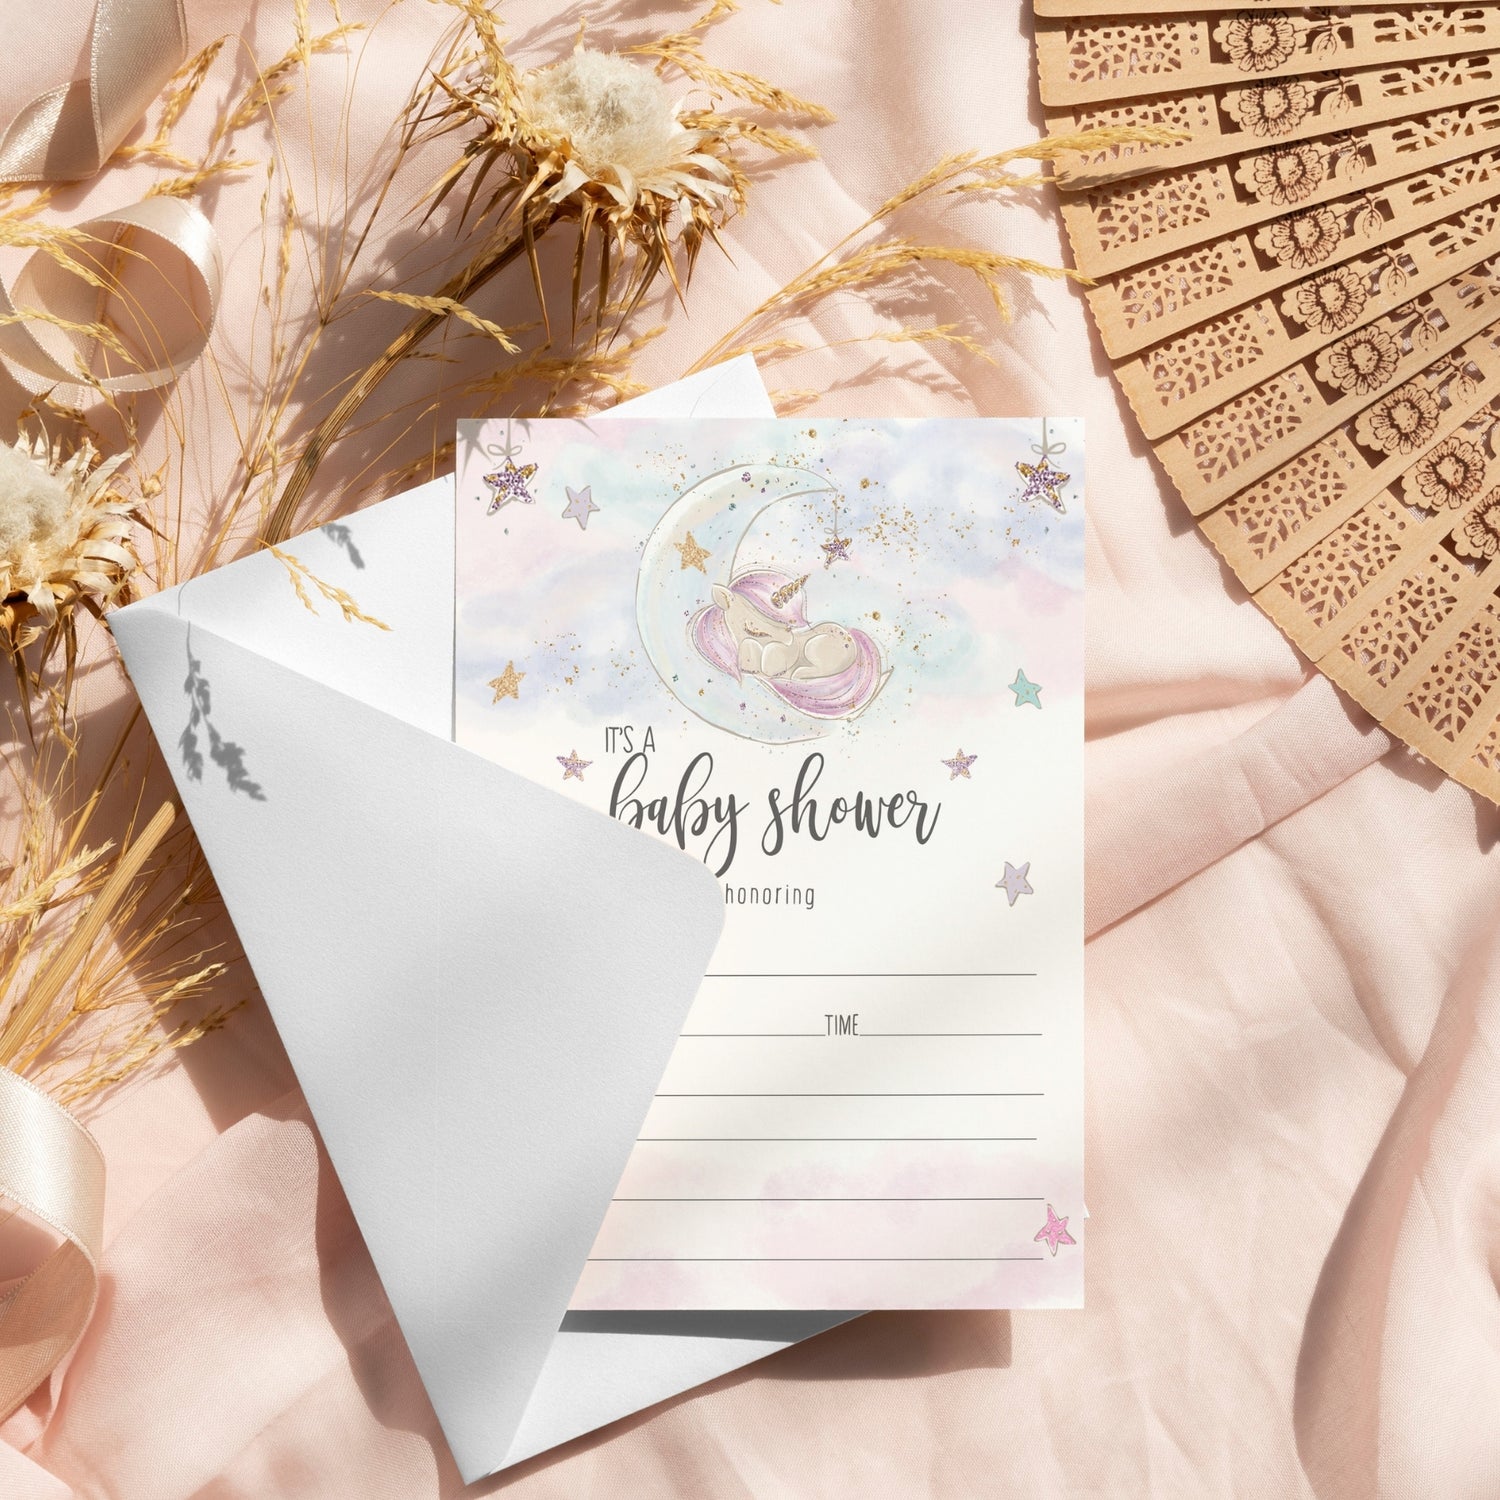 Enter a world of magic with our whimsical unicorn baby shower theme, adorned with rainbow stars and pastel hues of lilac, gold, and pink. Our enchanting collection includes invitations, thank you cards, and games, perfect for a fairytale celebration.